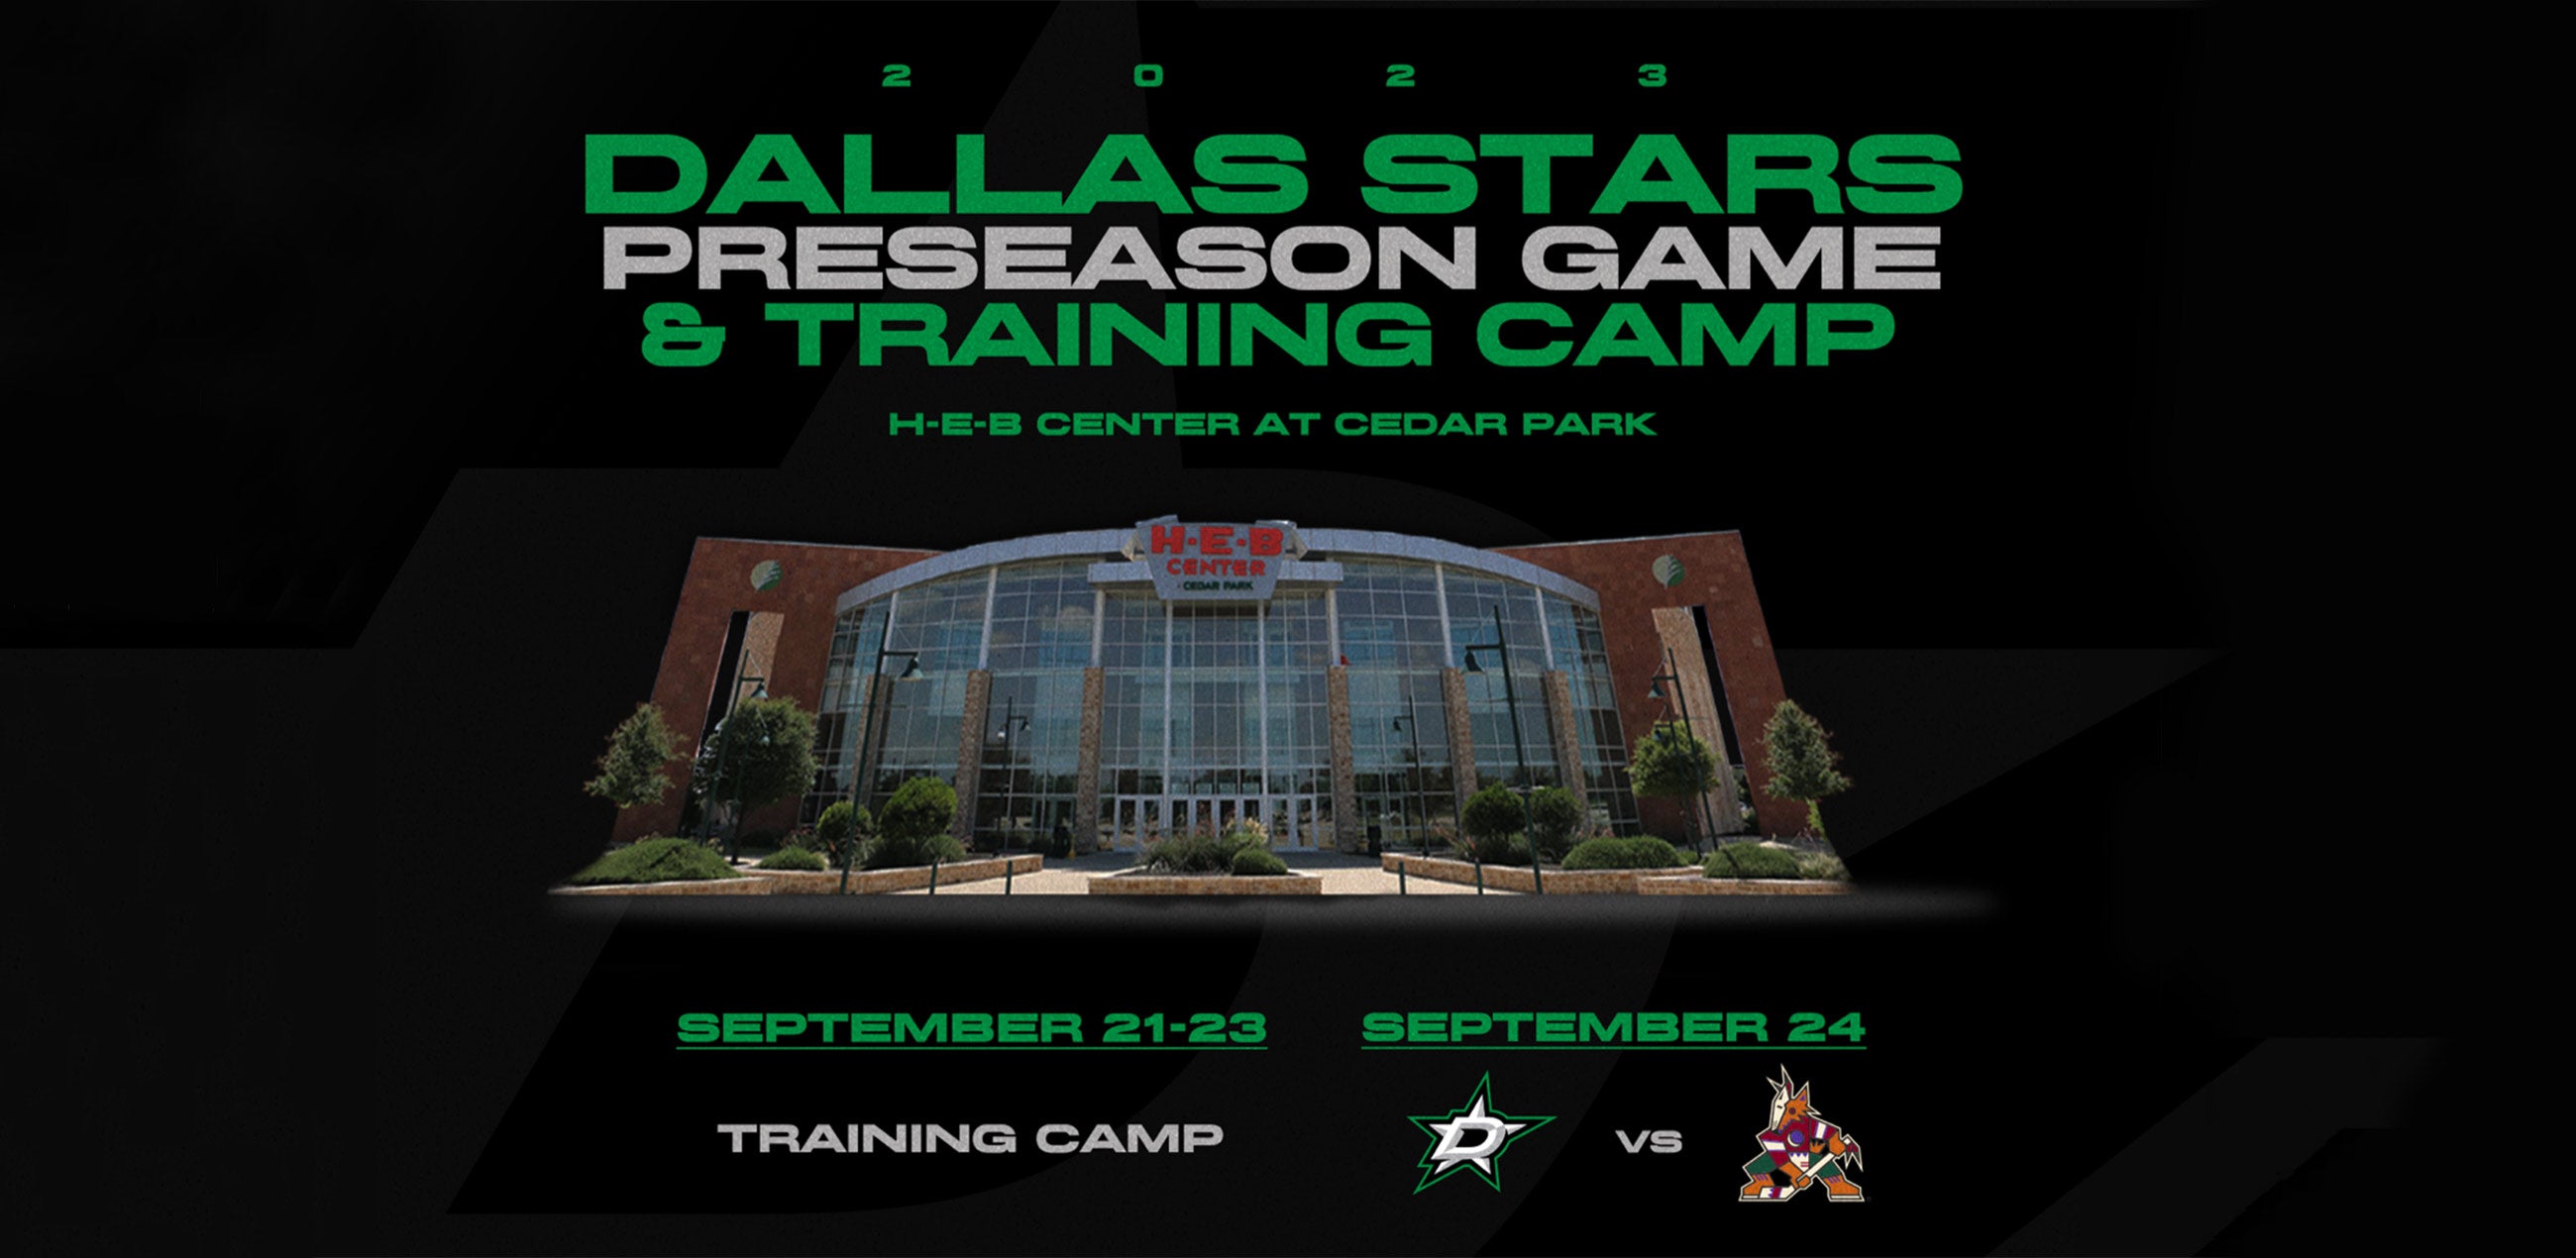 DALLAS STARS TO HOST TRAINING CAMP AND A PRESEASON GAME AGAINST THE COYOTES AT H-E-B CENTER AT CEDAR PARK THIS SEPTEMBER